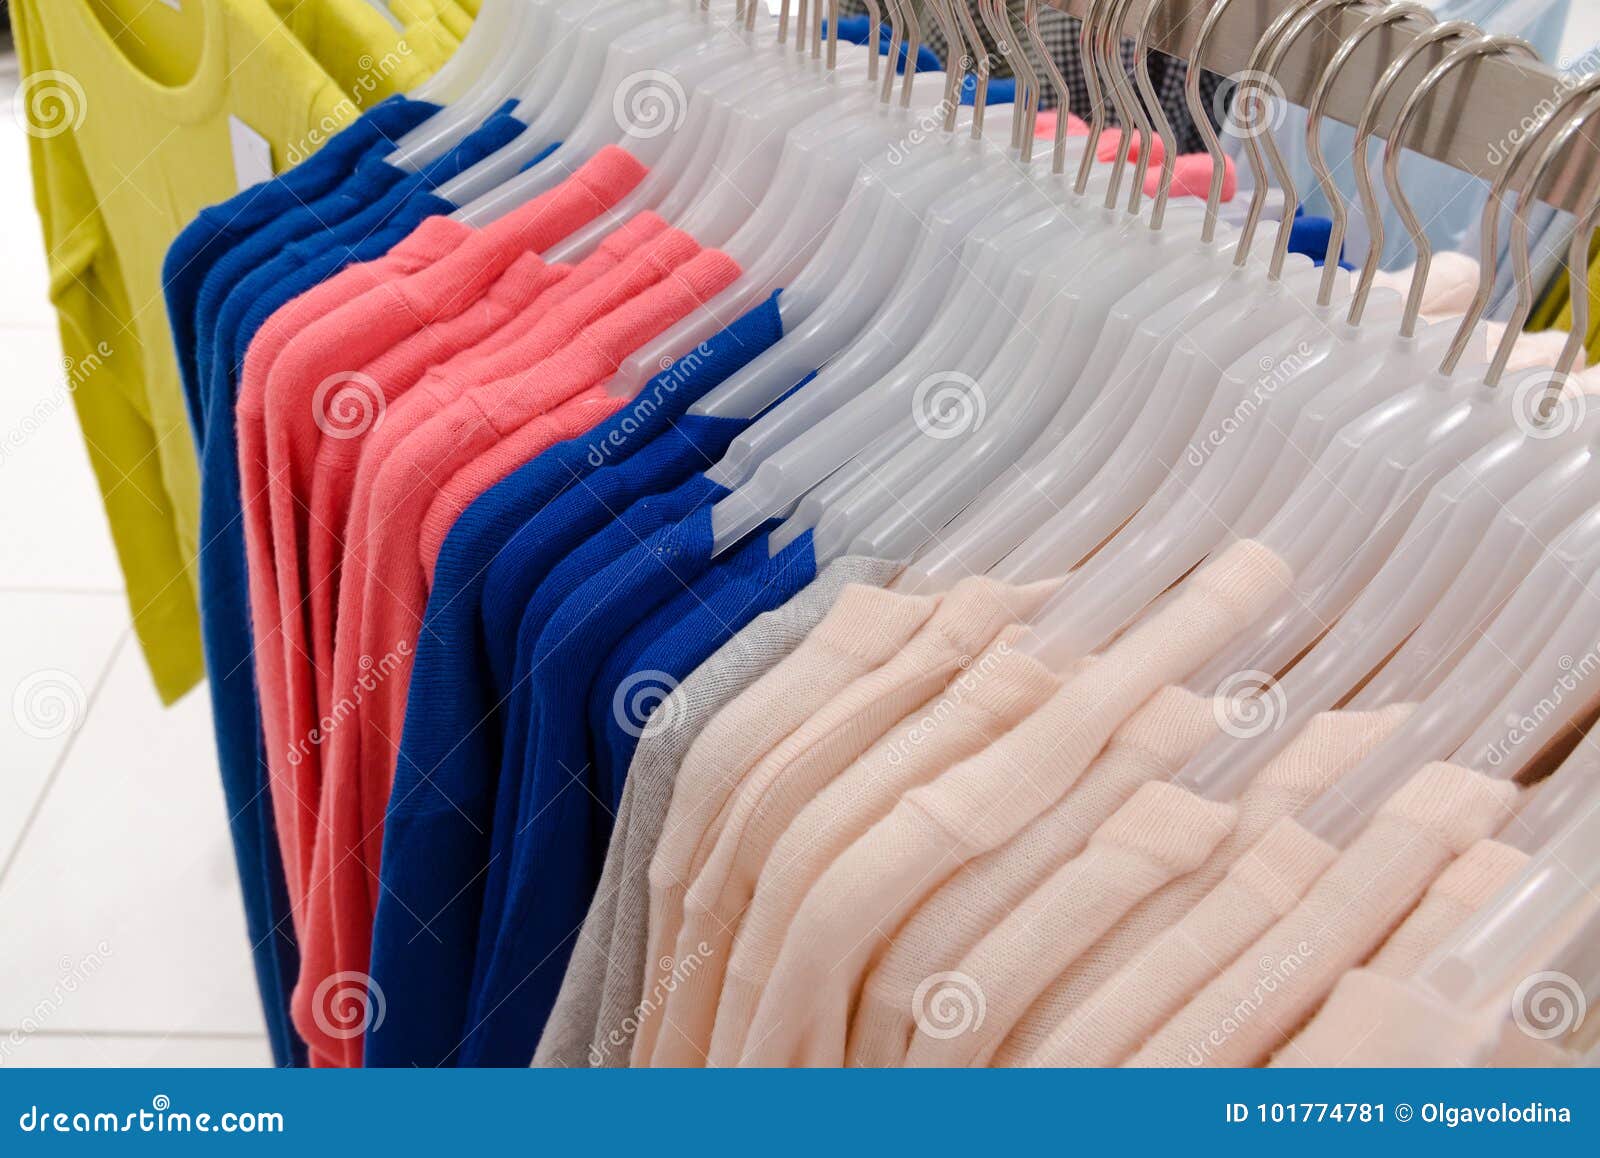 Womens Sweaters on Hanger in the Store Stock Image - Image of ...